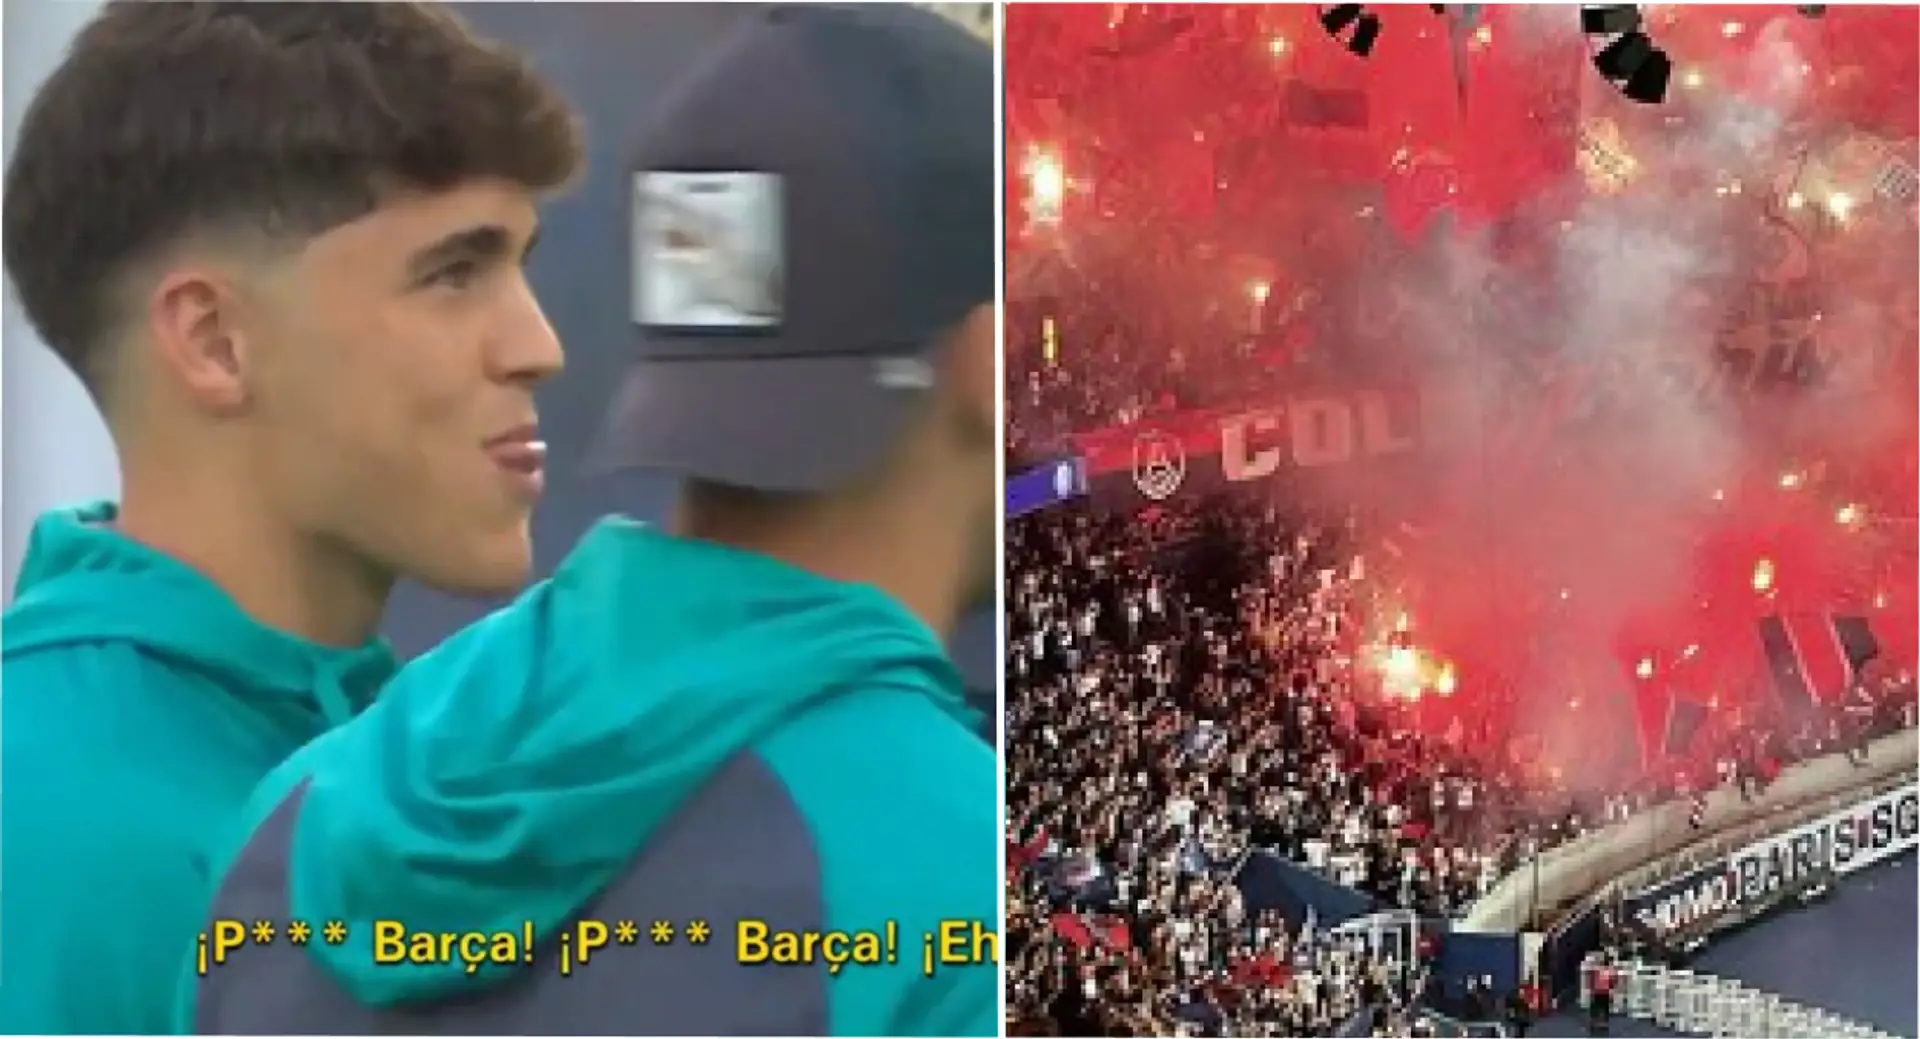 PSG fans chant 'P*ta Barca' before kick-off – you'll LOVE players' reaction